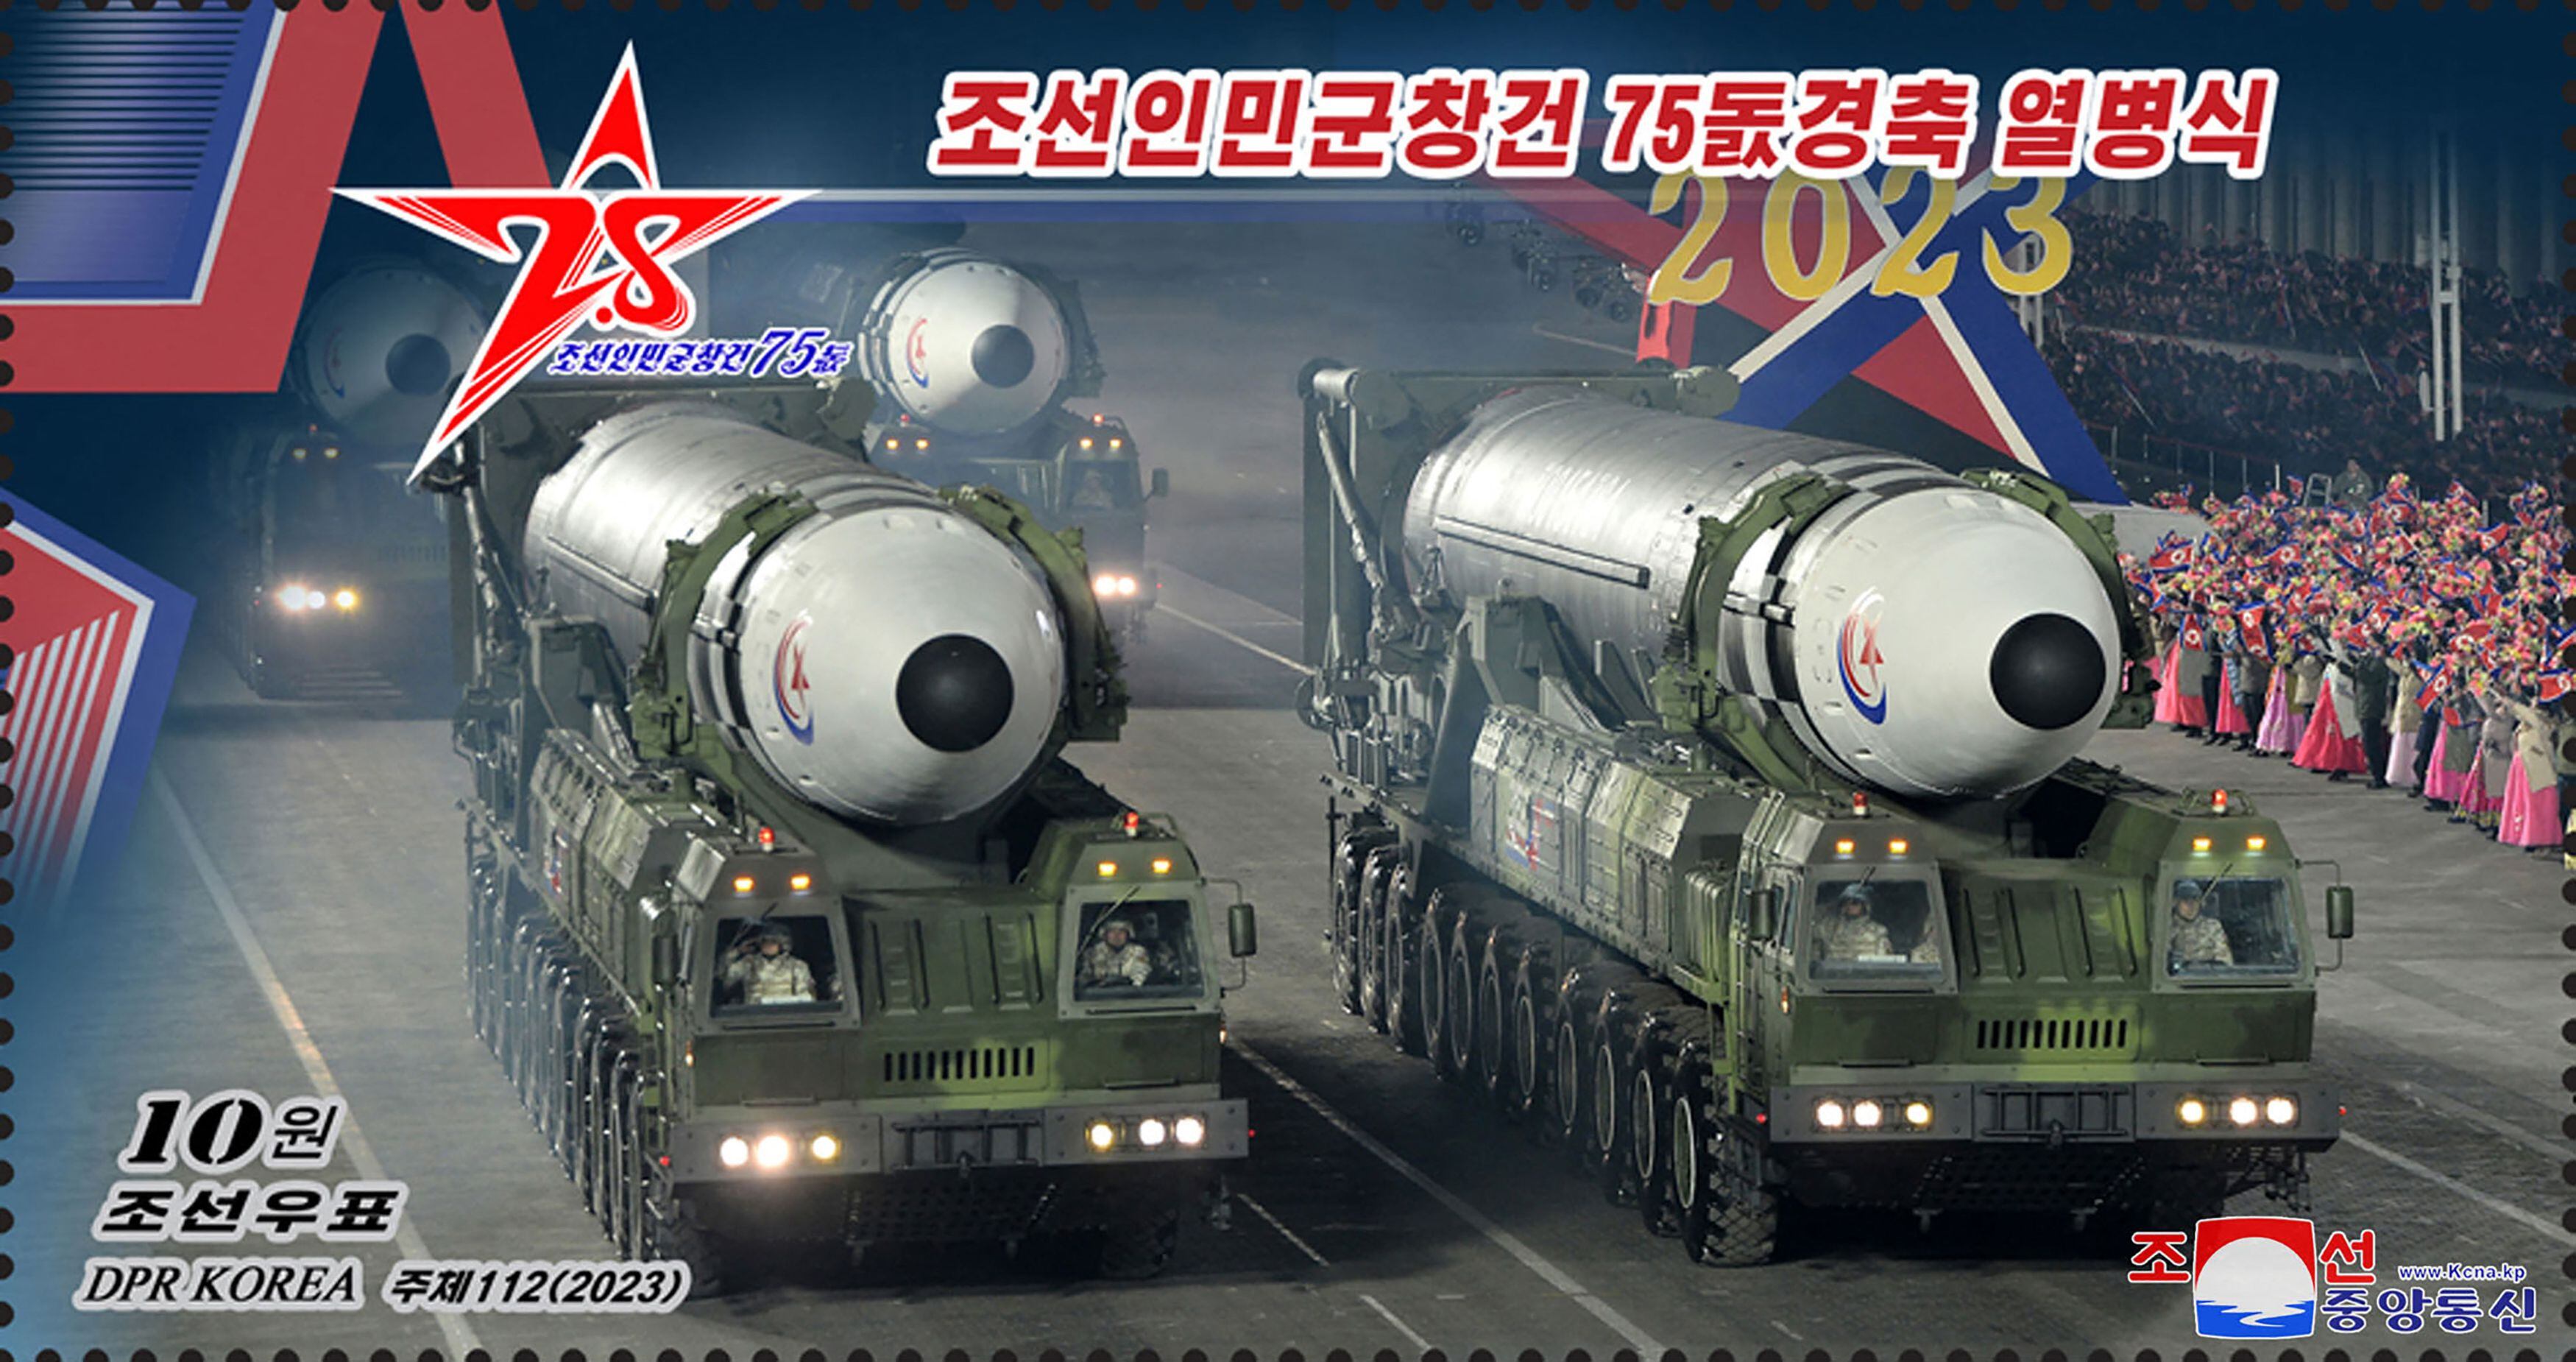 The Hwasong-18, fired by North Korea on Thursday, is a state-of-the-art missile that was unveiled during a military parade in February.